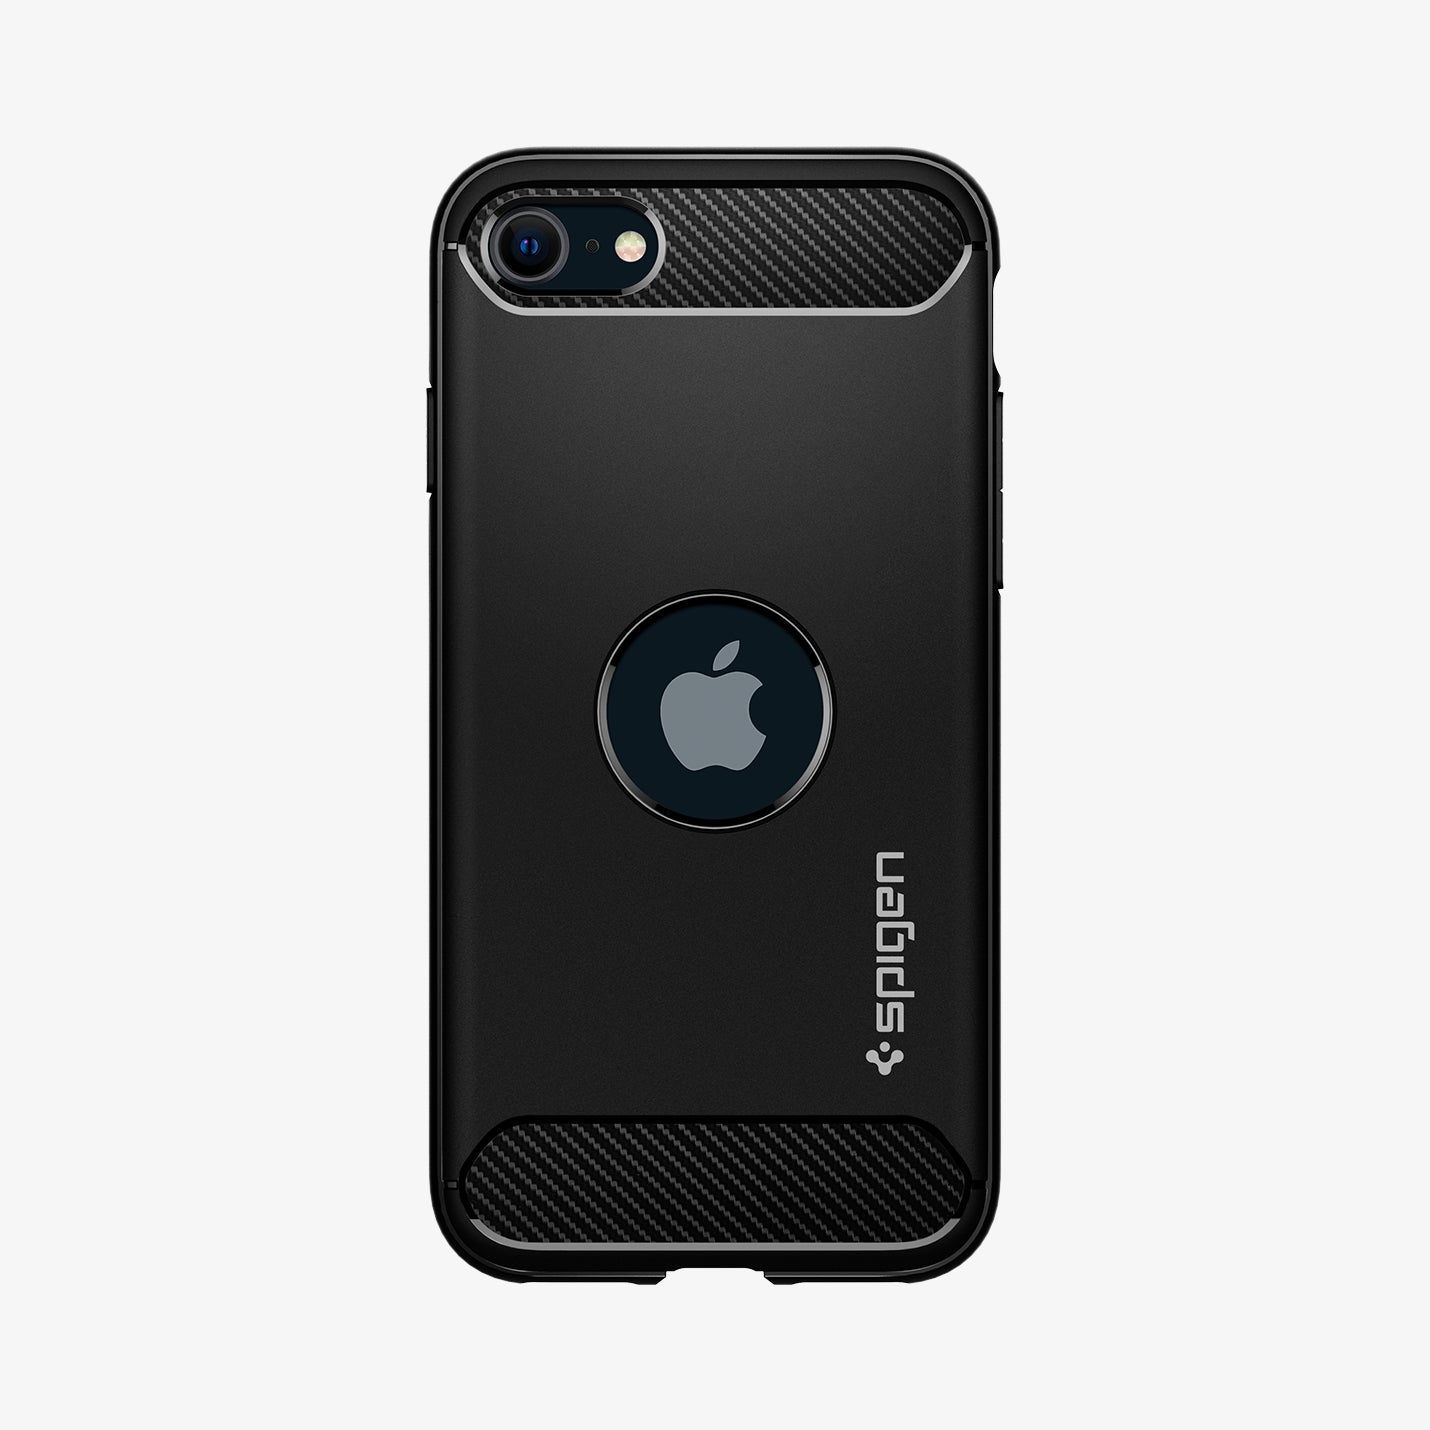 ACS00944 - iPhone SE Rugged Armor case in black showing the back